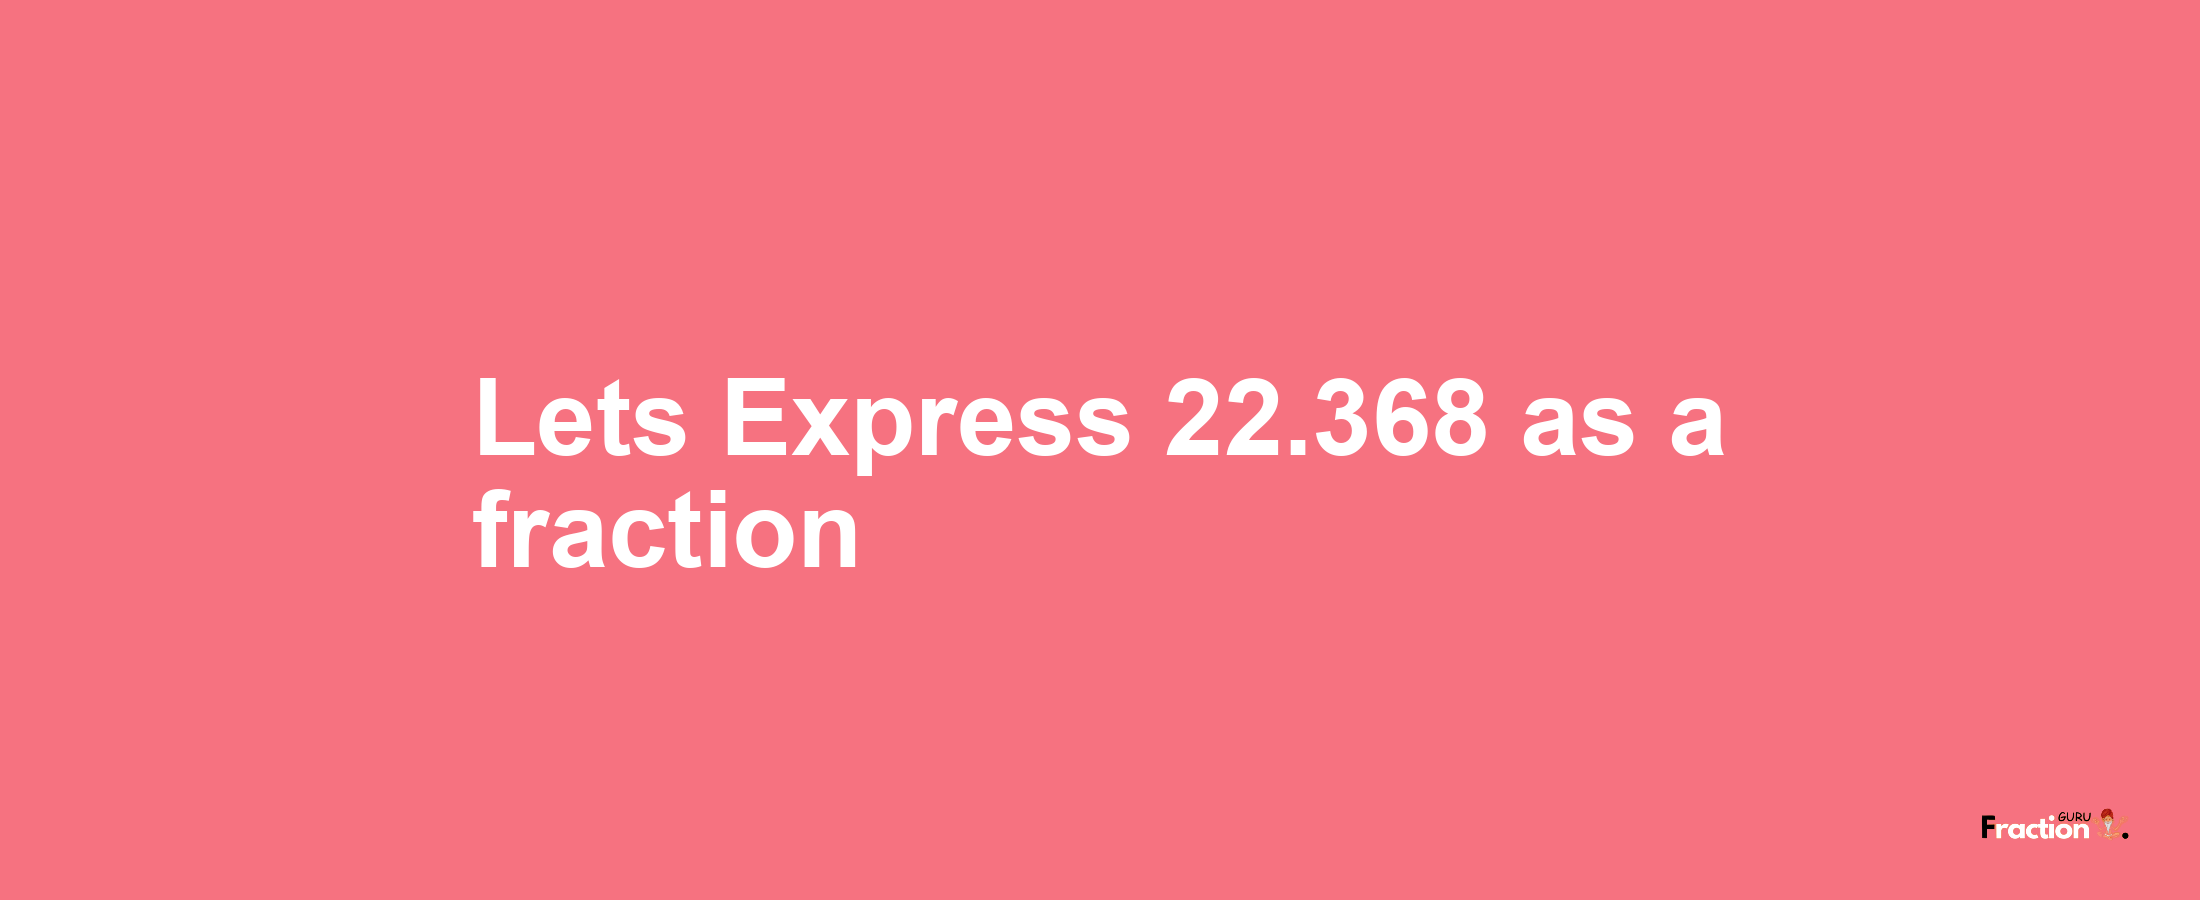 Lets Express 22.368 as afraction